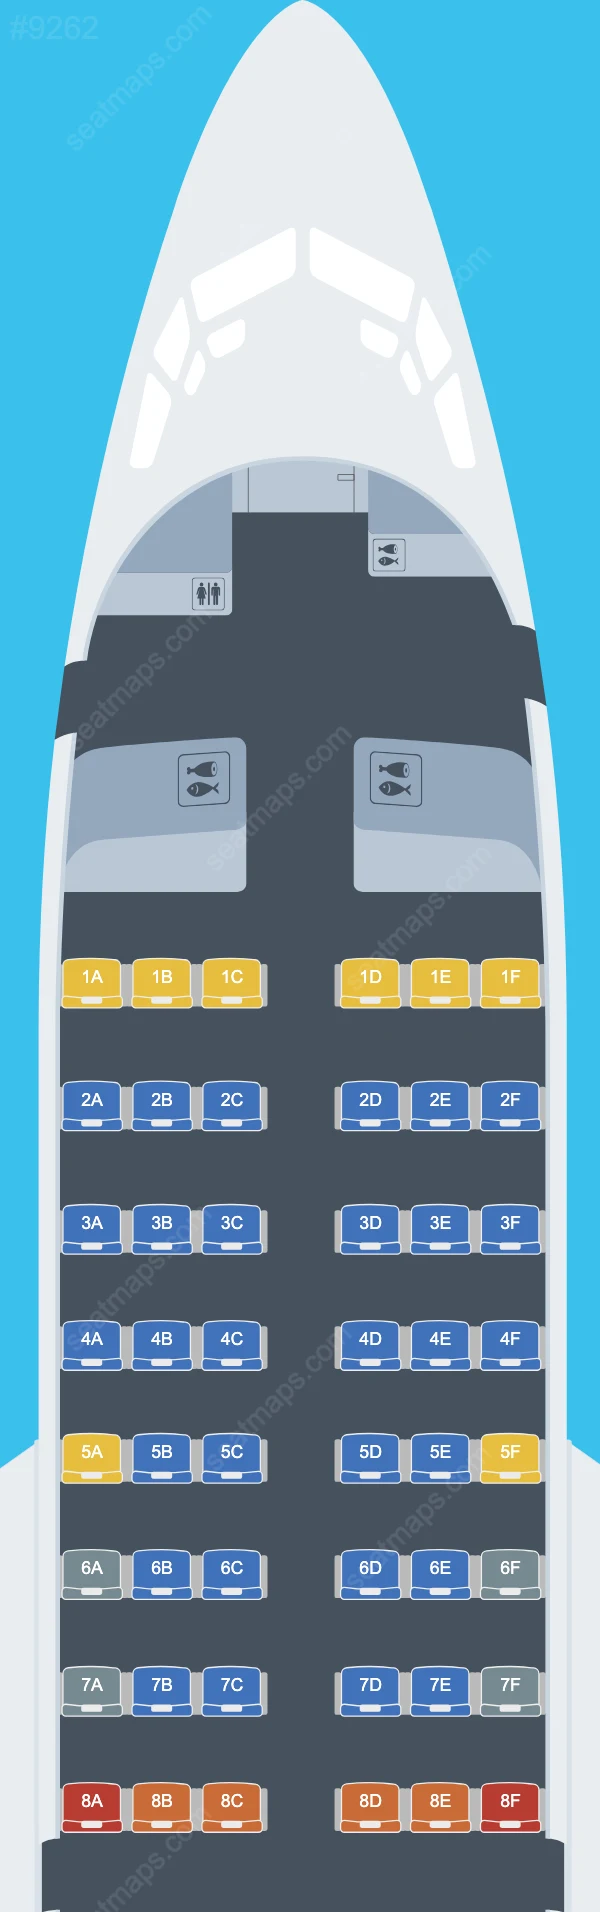 Badr Airlines Boeing 737 Seat Maps 737-500